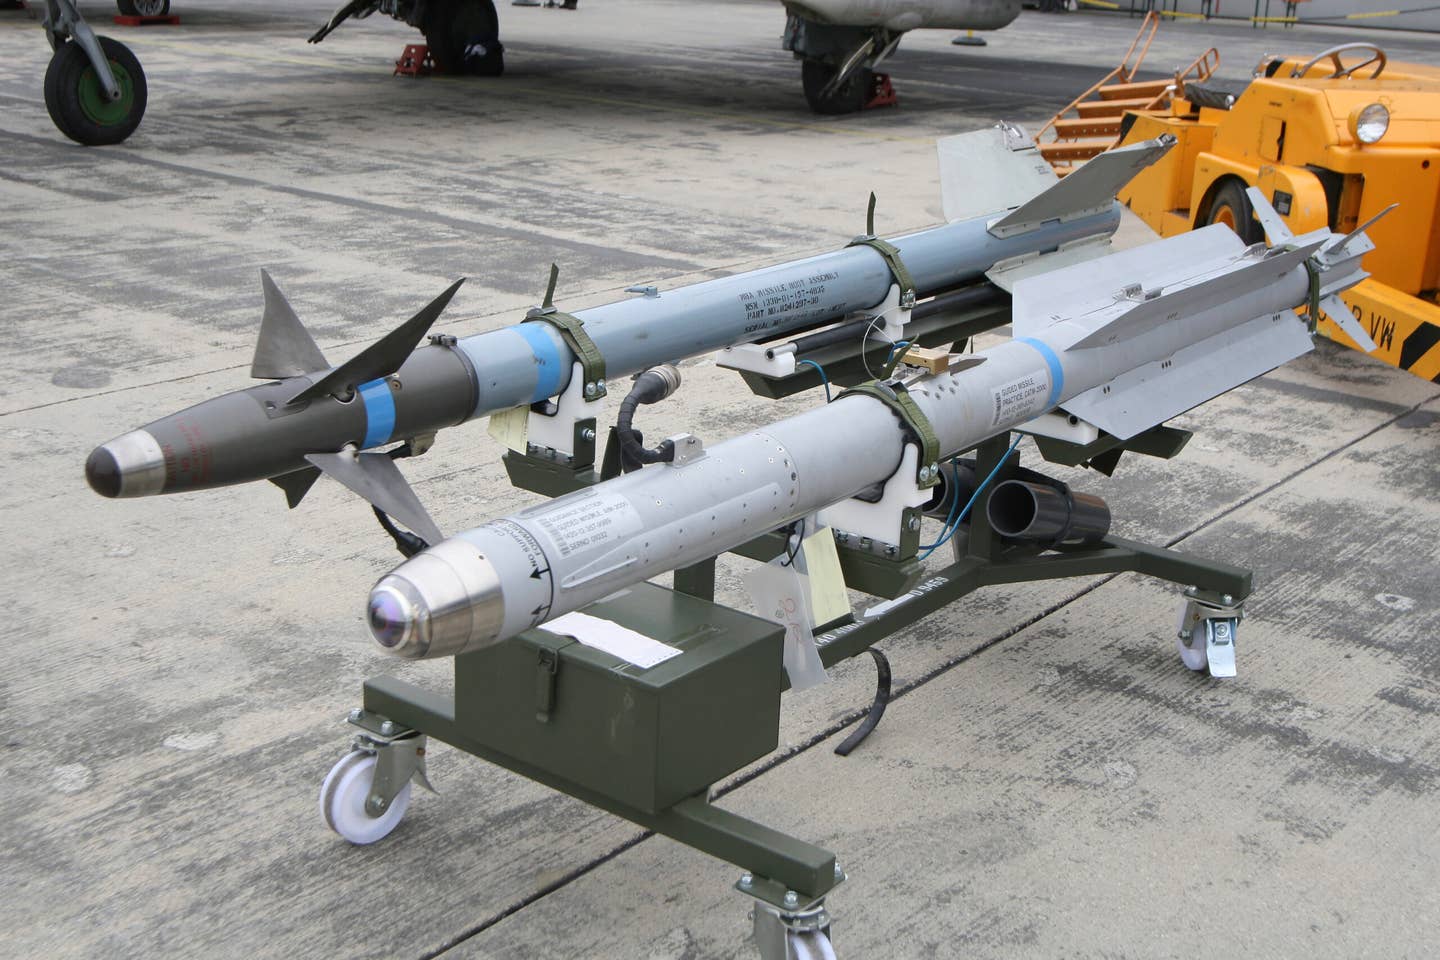 IRIS-T air-to-air missile compared to an AIM-9 Sidewinder at the German trials, Manching Air Base, Germany. <em>Timm Ziegenthaler/Stocktrek Images via Getty Images</em>